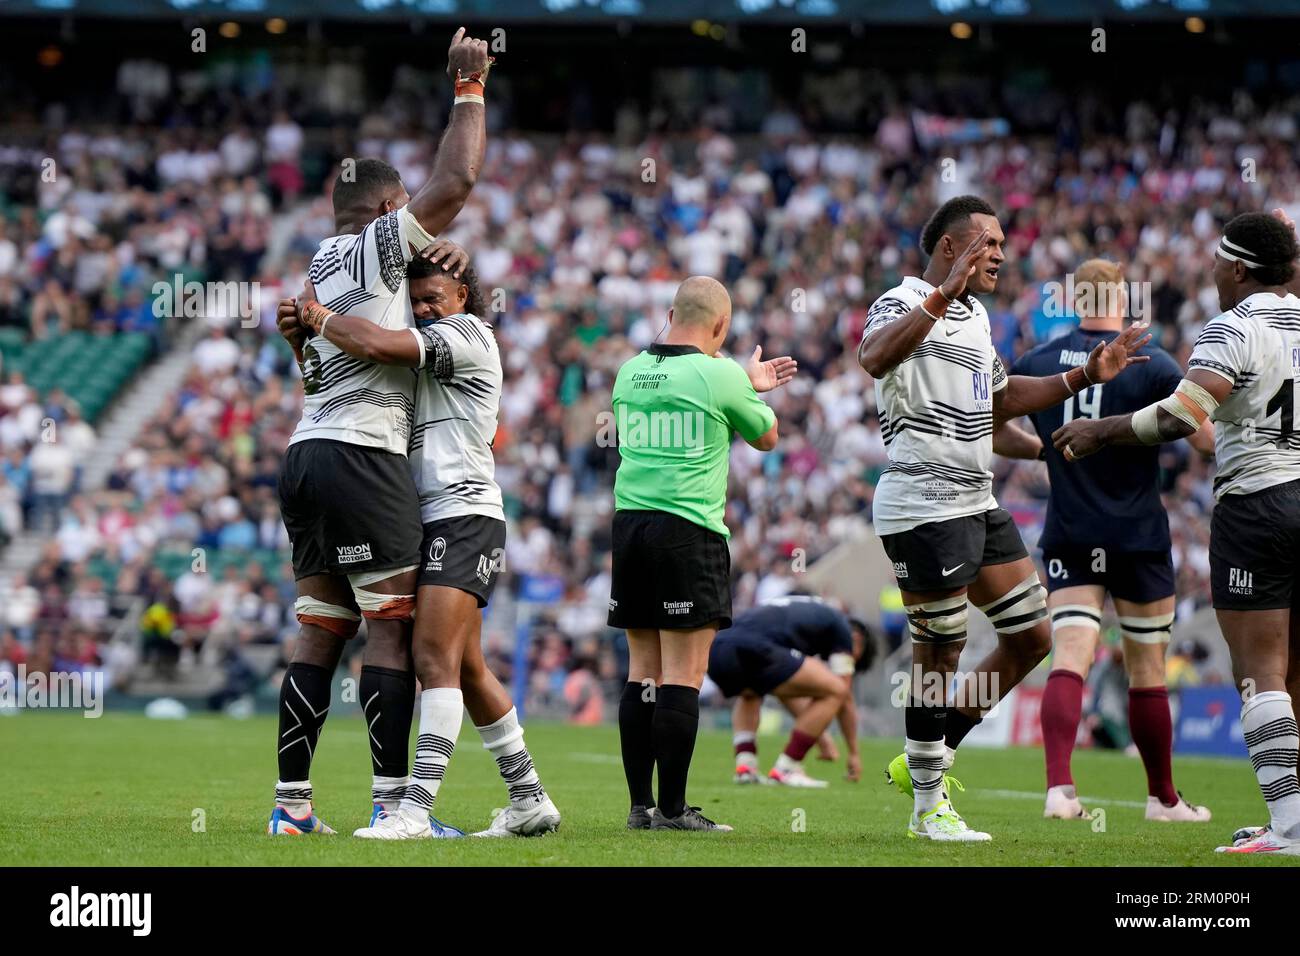 Fijis players celebrate at the rugby union international match between England and Fiji at Twickenham stadium in London, Saturday, Aug. 26, 2023